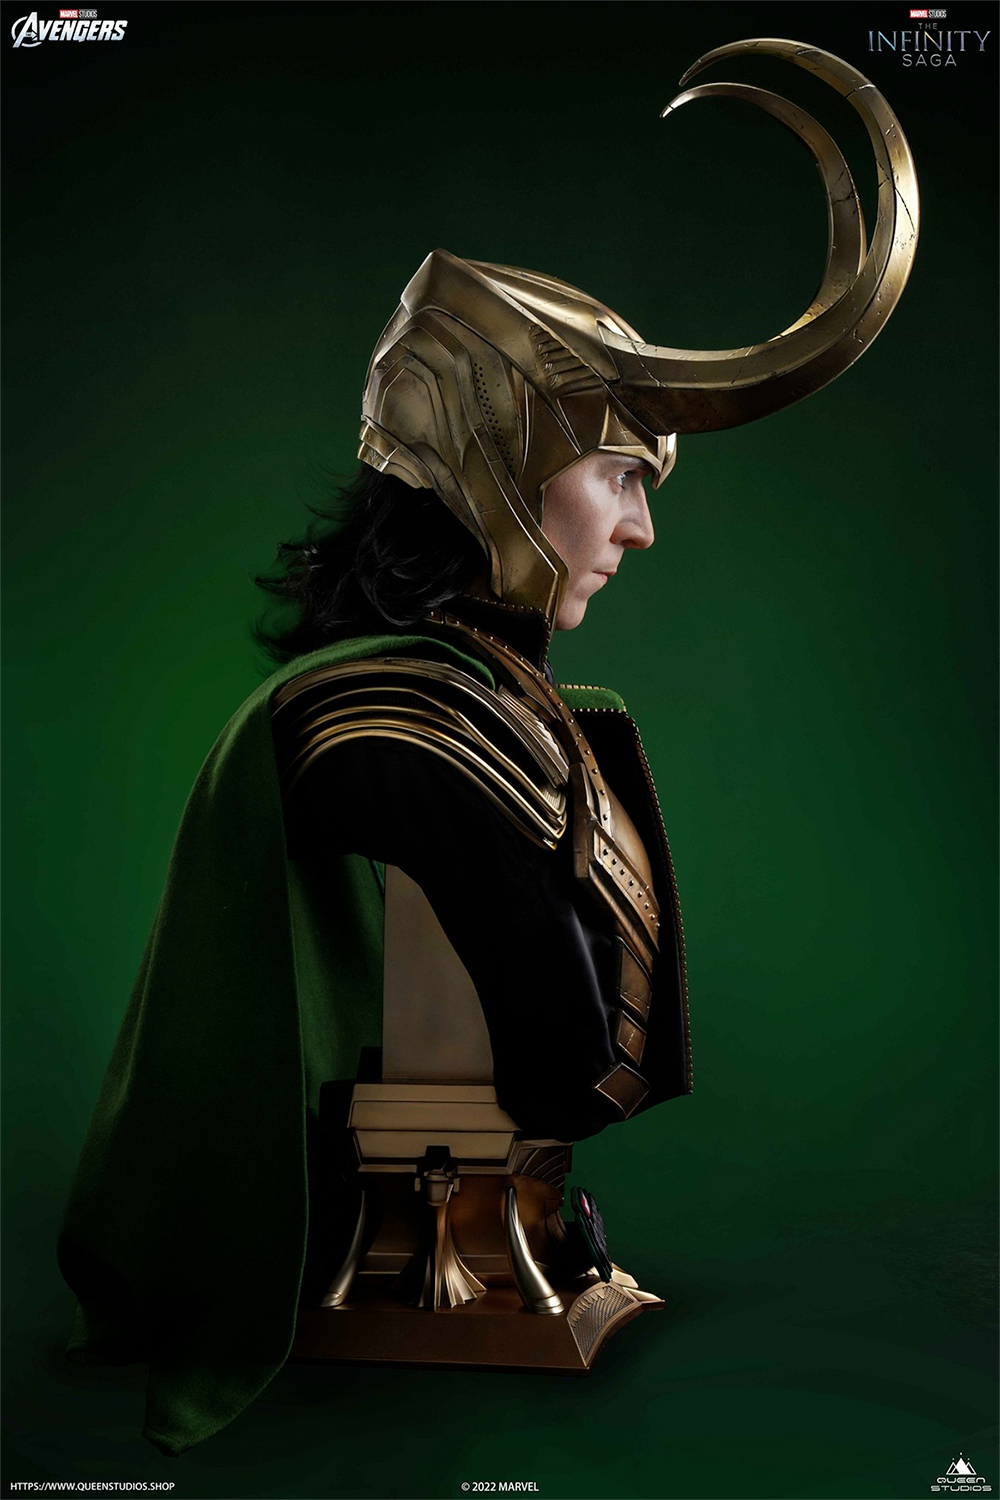 Loki The Avengers Limited Edition Life-Size Bust